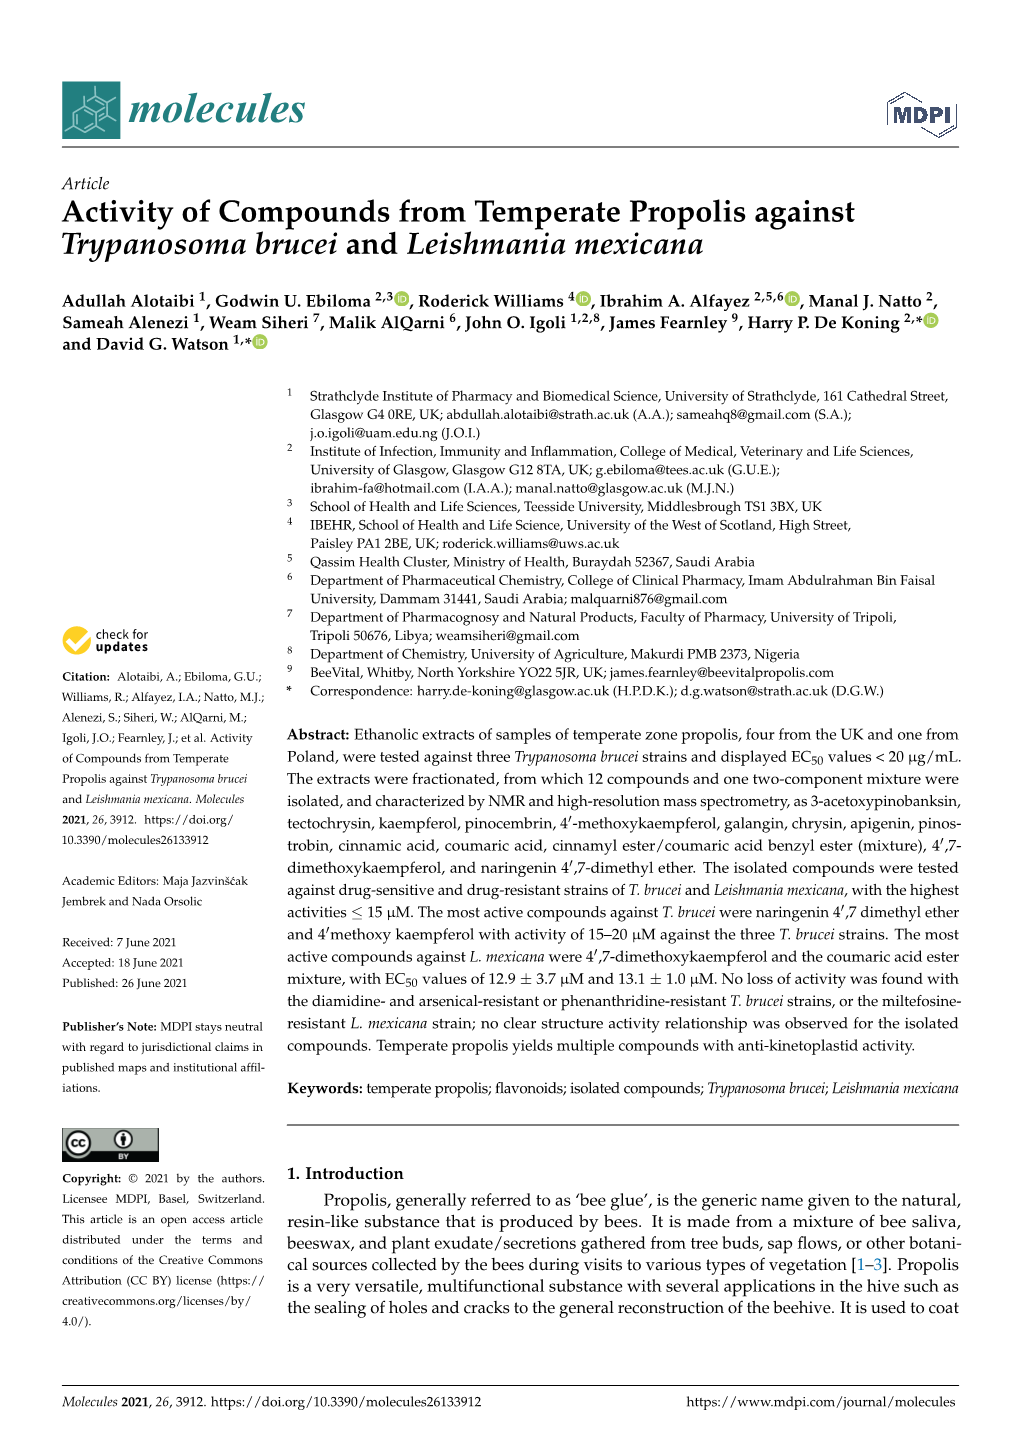 Activity of Compounds from Temperate Propolis Against Trypanosoma Brucei and Leishmania Mexicana